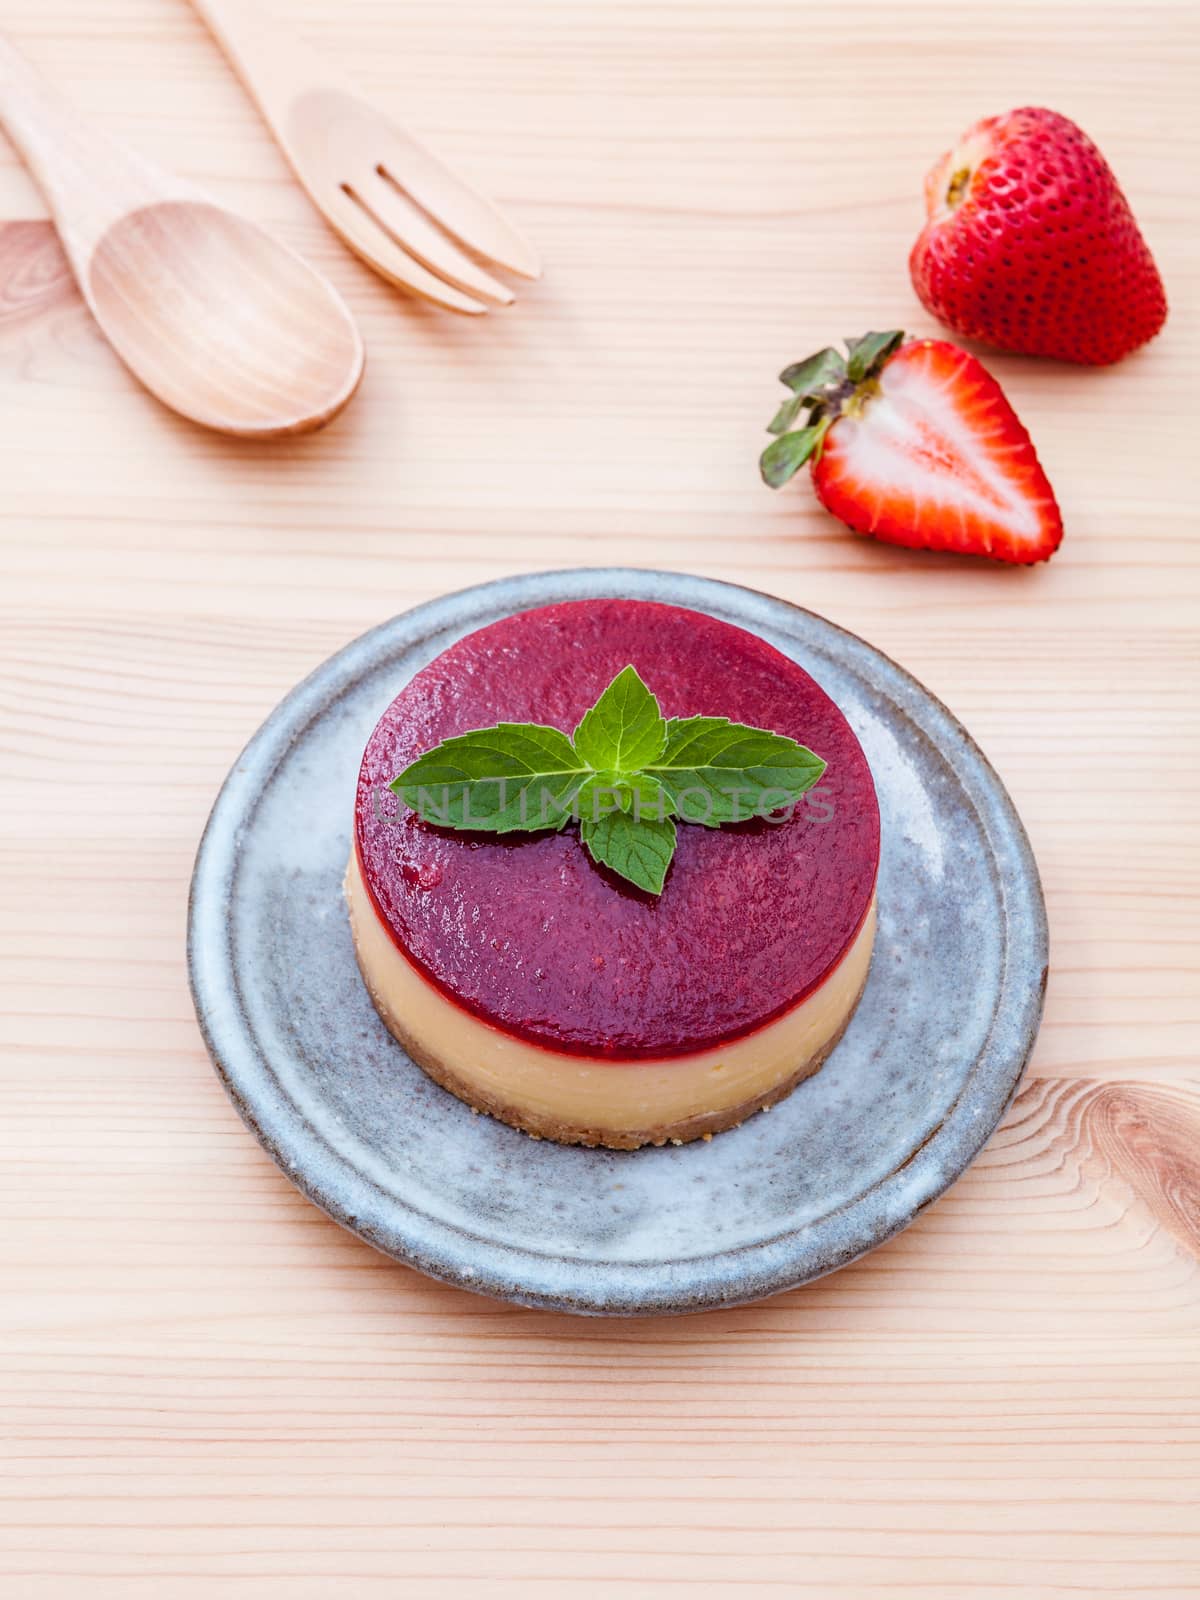 Strawberry cheesecake with fresh mint leaves on wooden backgroun by kerdkanno